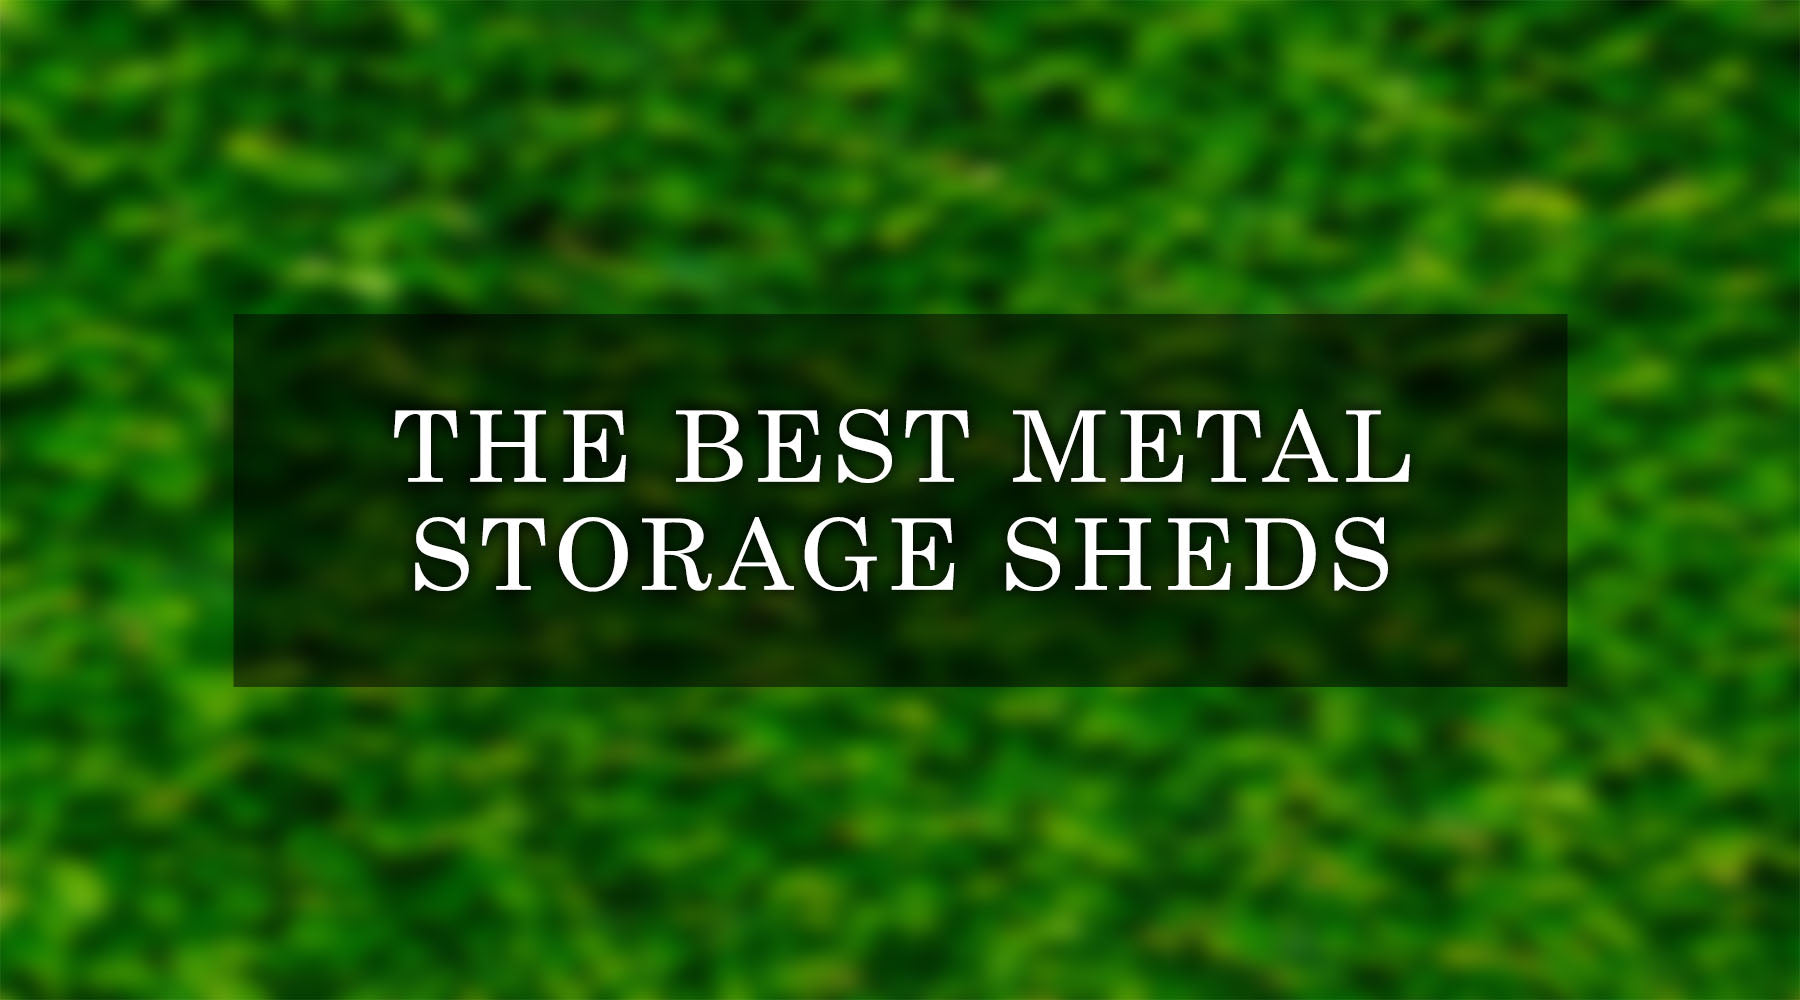 The 5 Best Metal Storage Sheds